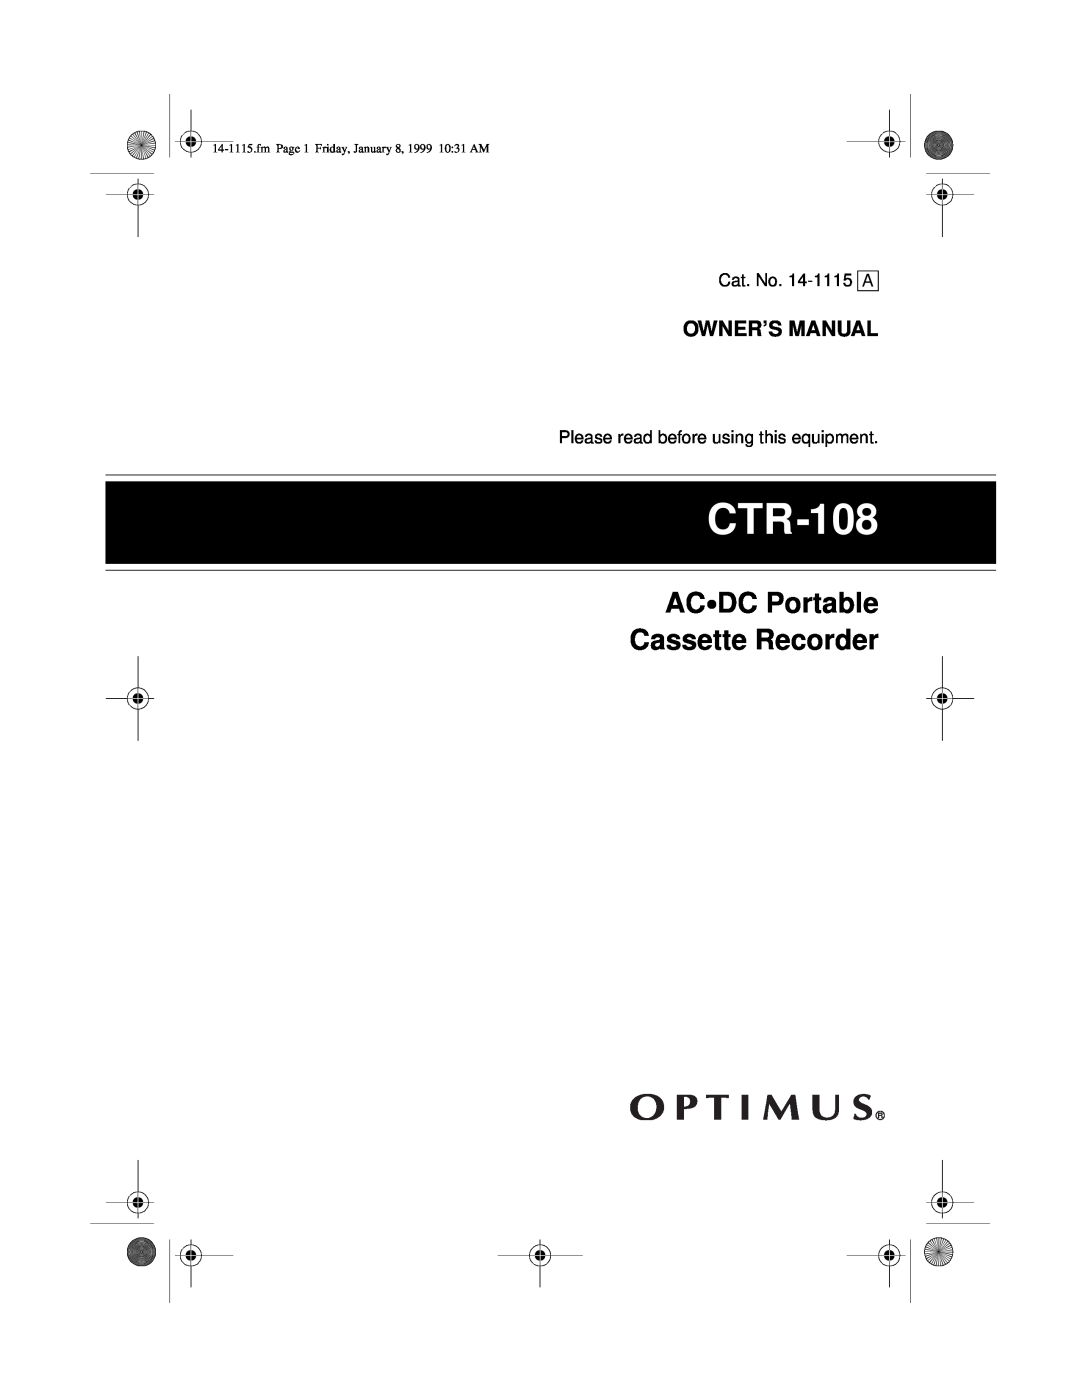 Optimus CTR-108 owner manual AC∙DC Portable Cassette Recorder, fmPage 1 Friday, January 8, 1999 10 31 AM 